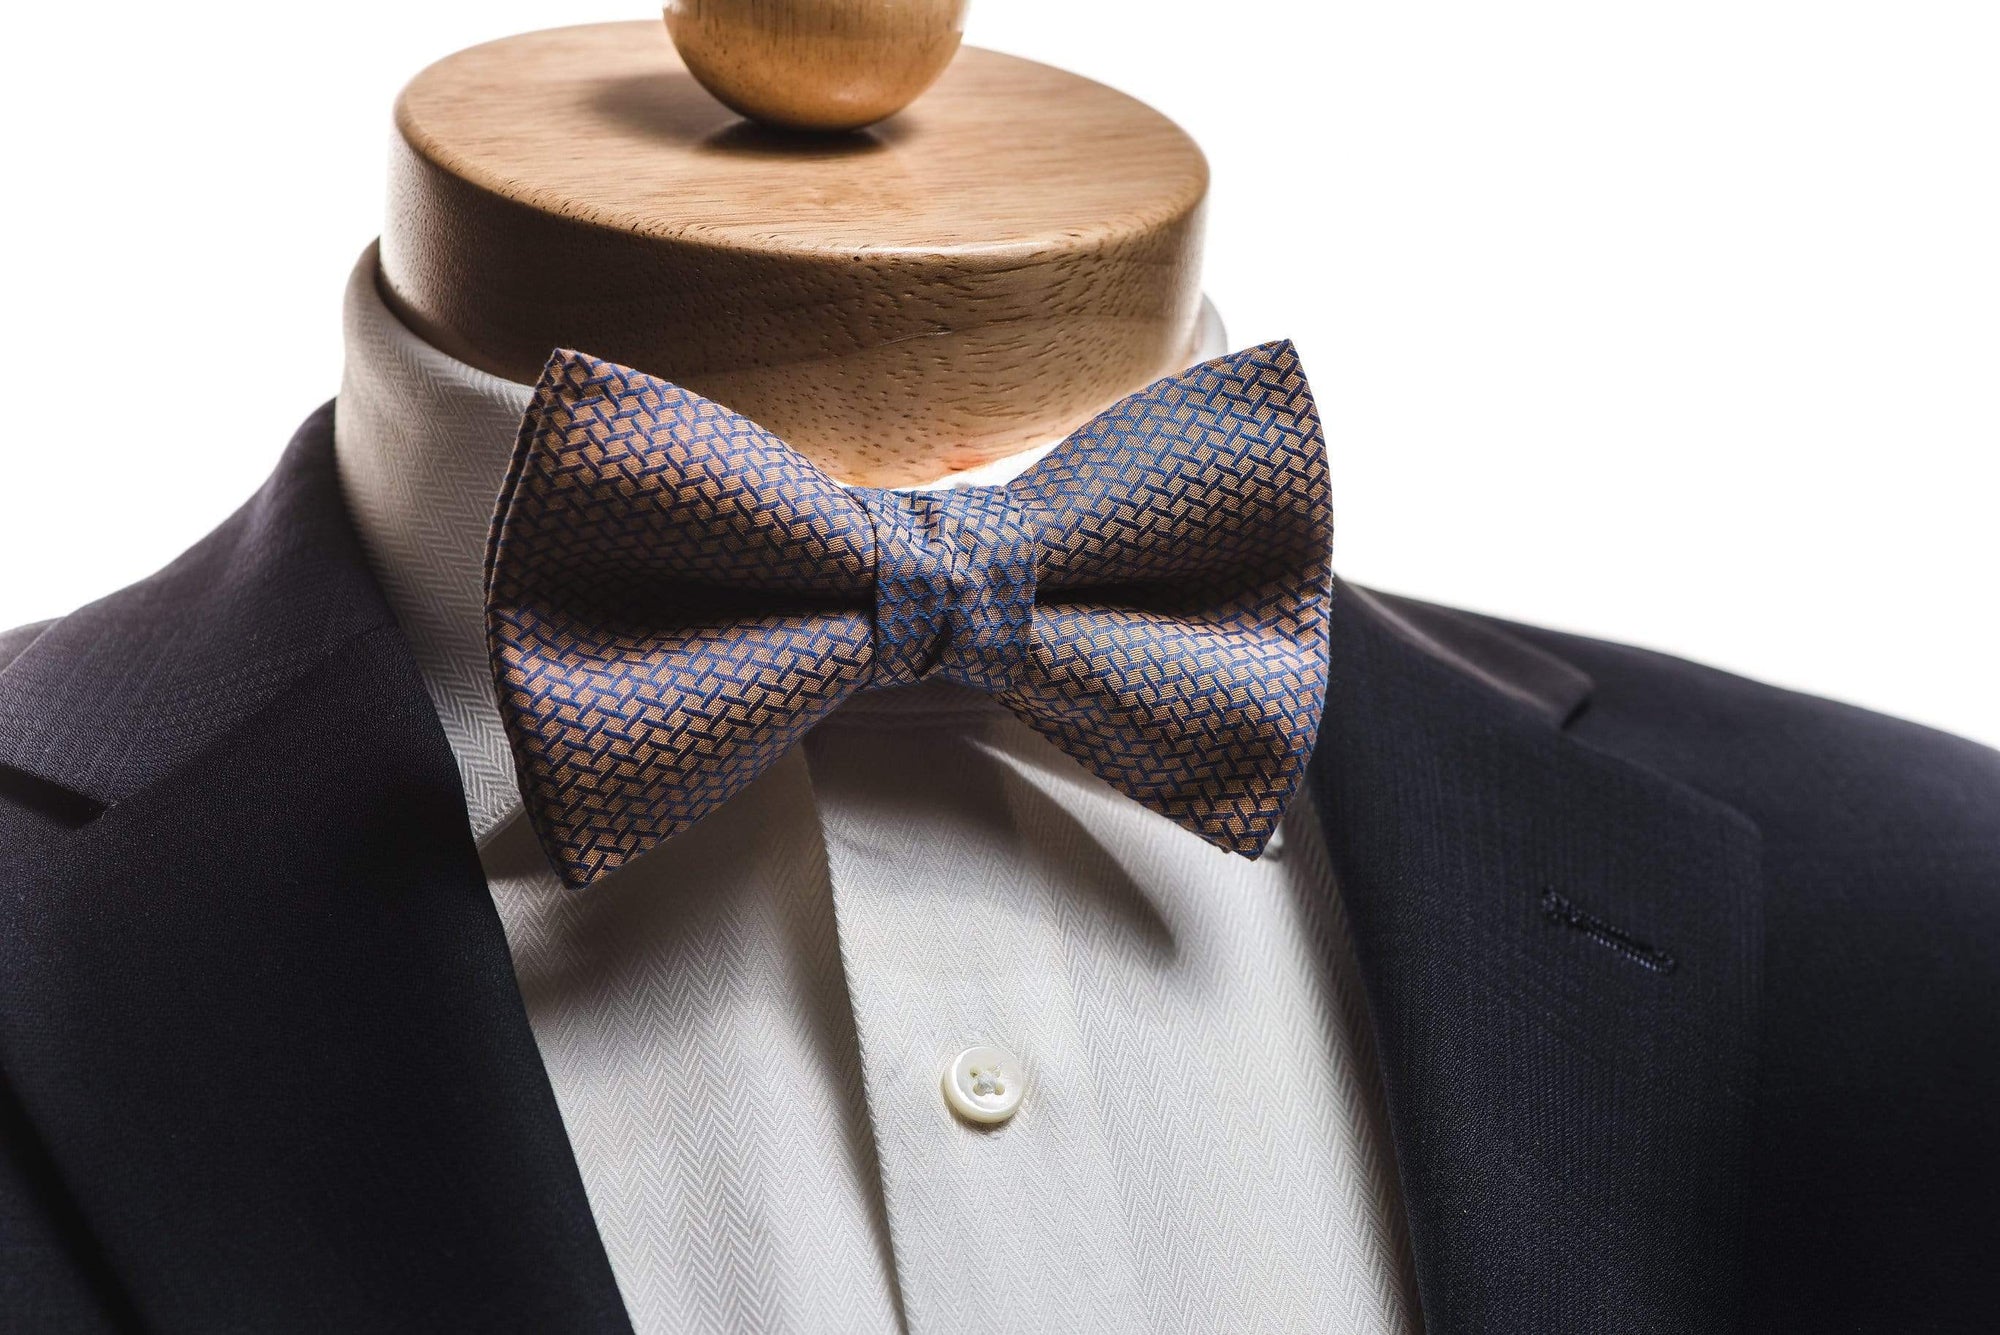 How Is A Handmade Bespoke Bowtie Crafted?